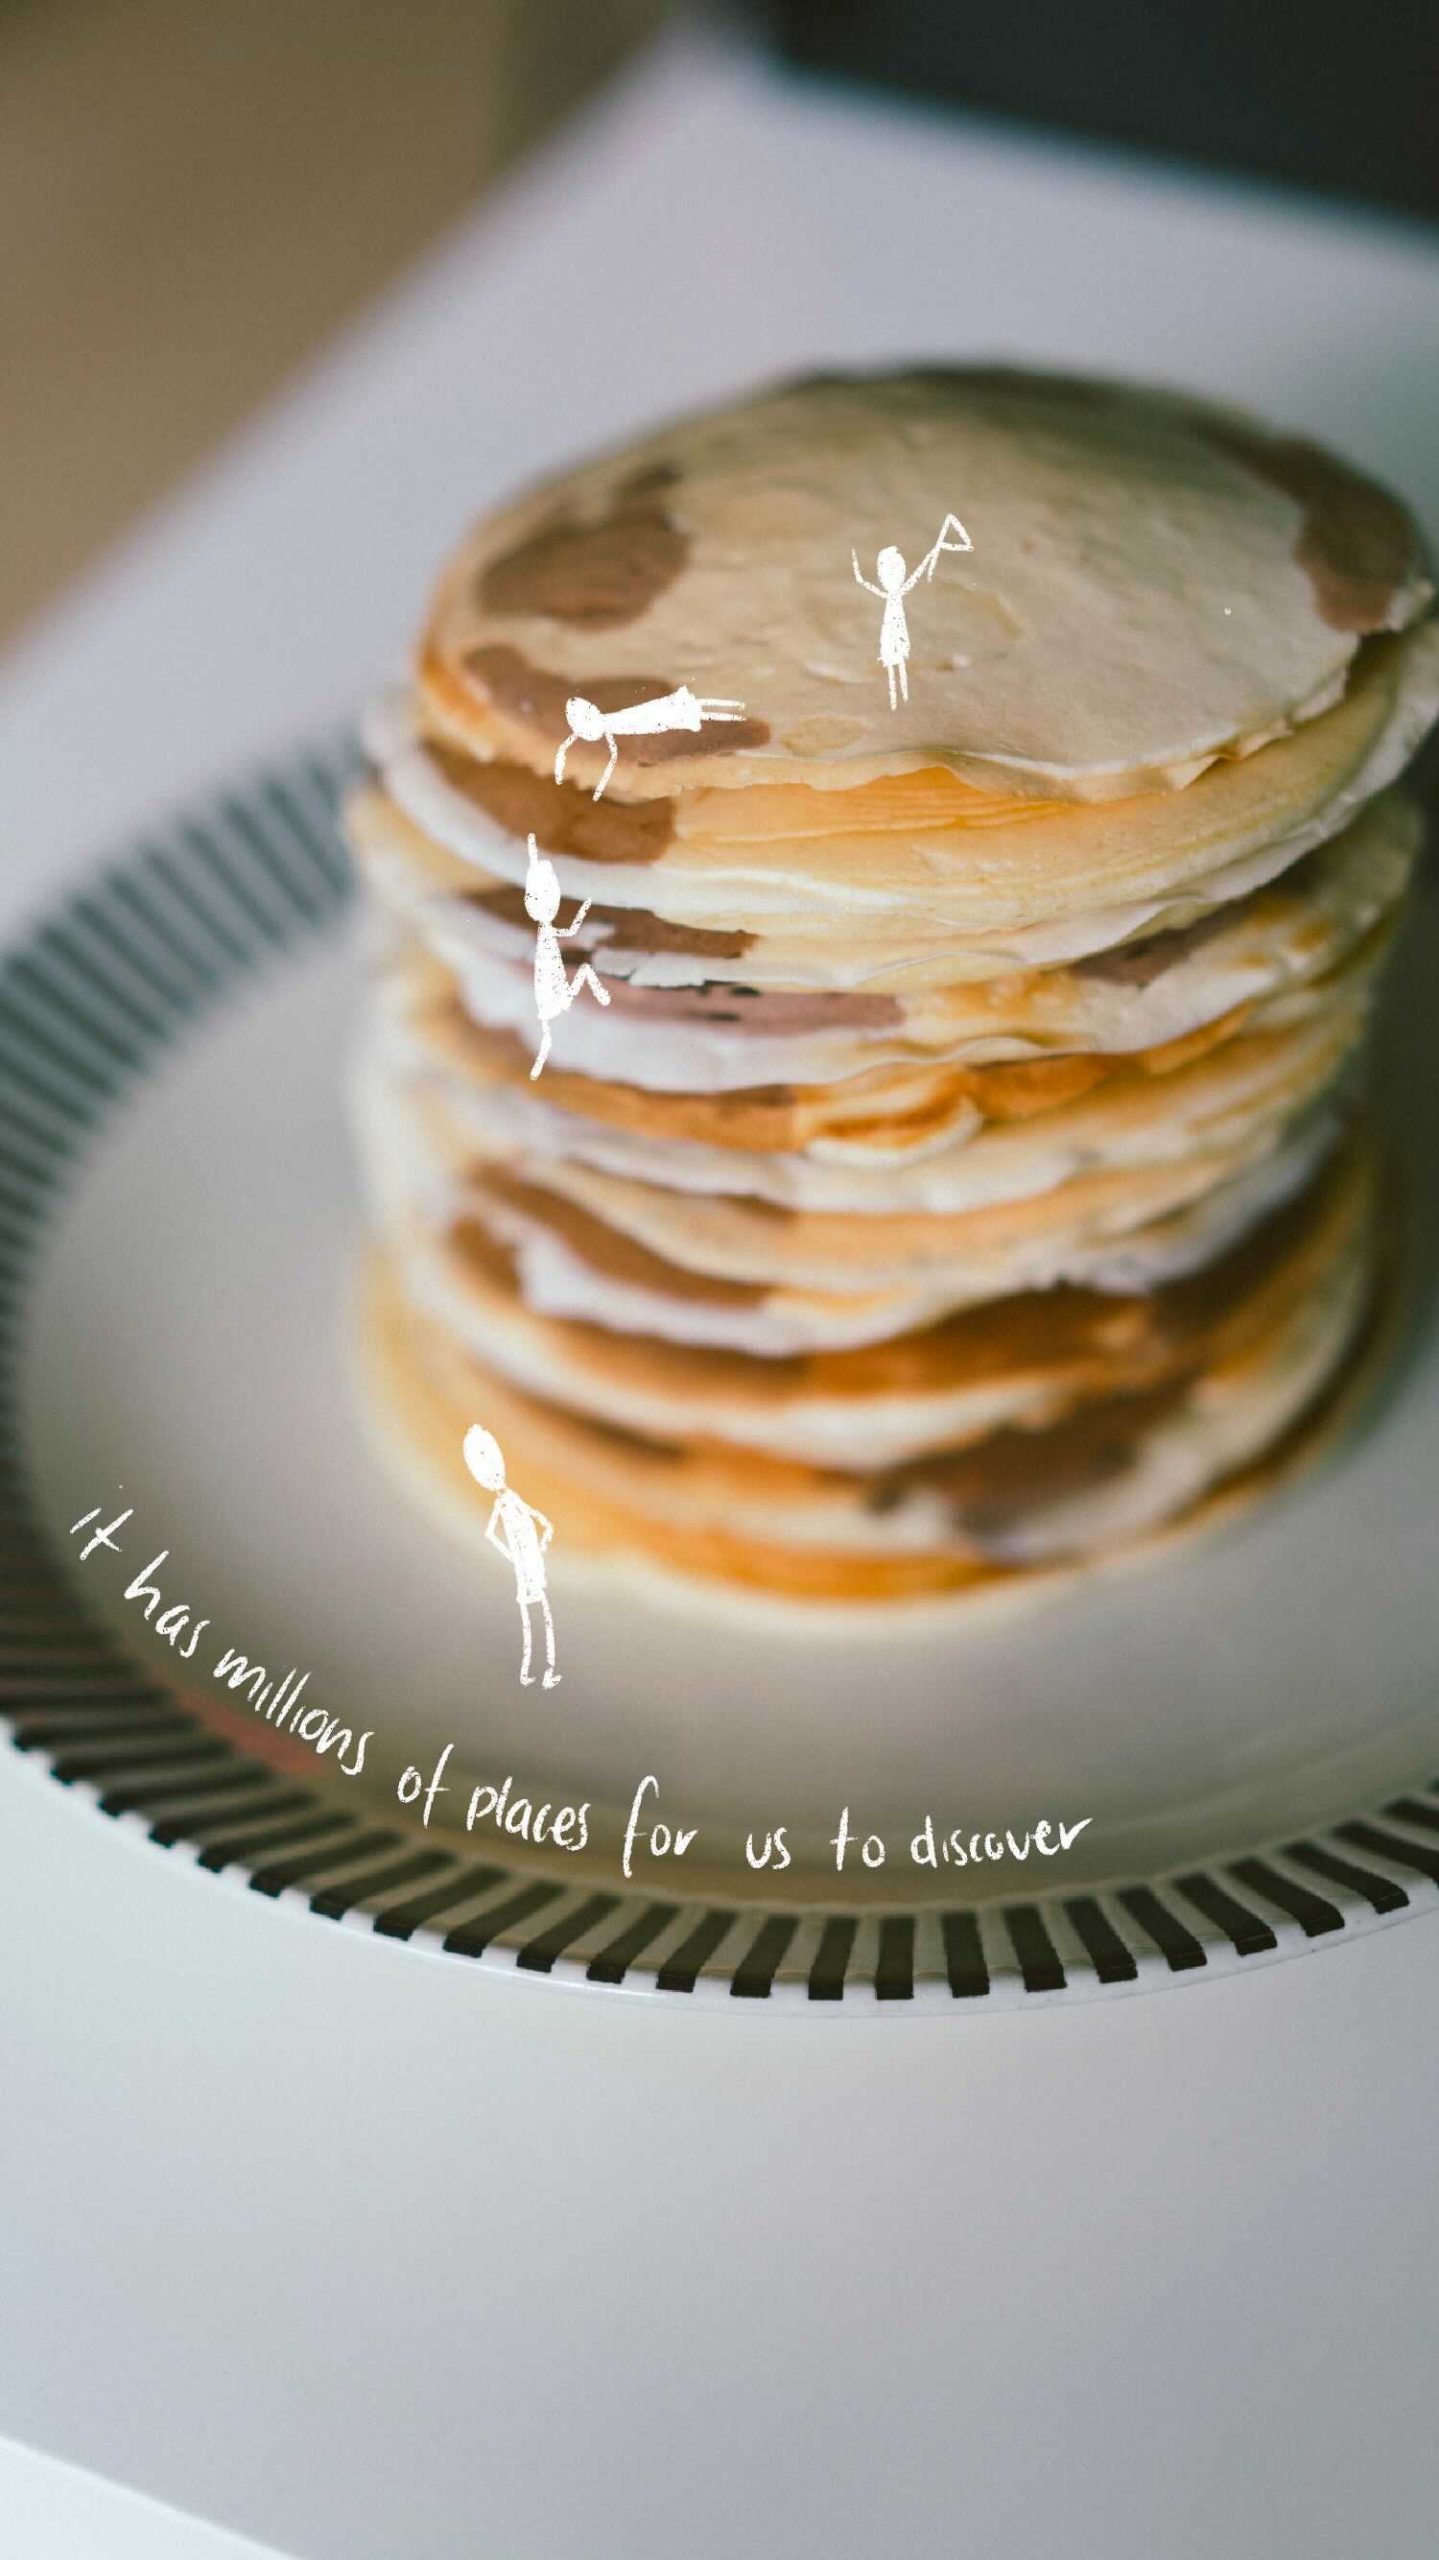 Stack of pancakes with doodles of people climbing down them quote- it has millions of places for us to discover